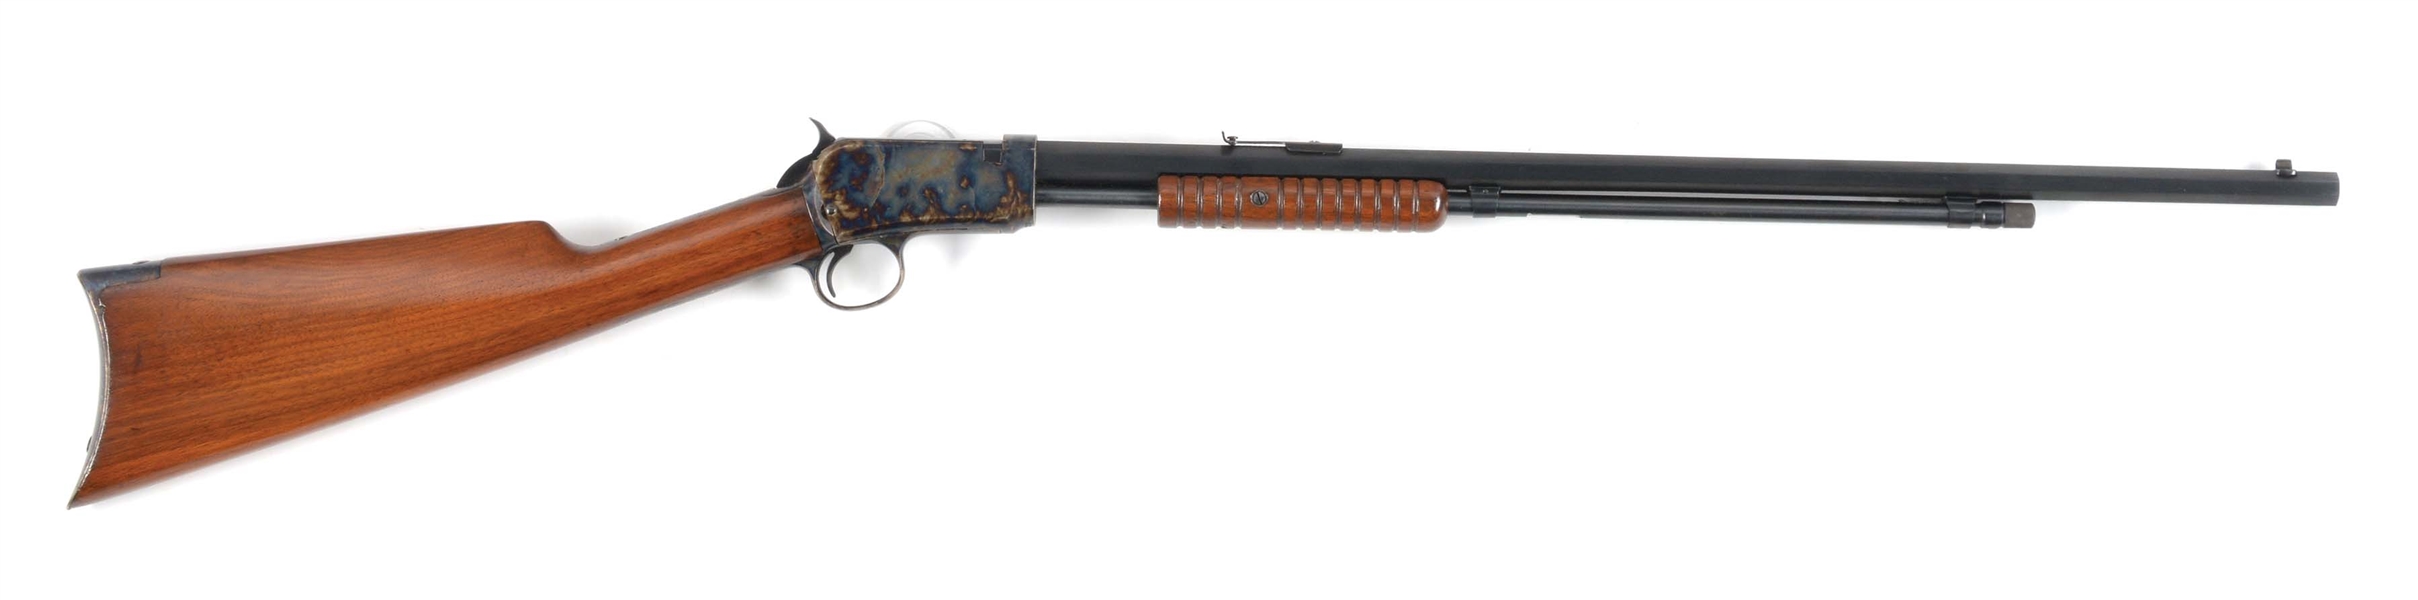 (C) WINCHESTER 1890 .22 LONG SLIDE ACTION RIFLE (1918).